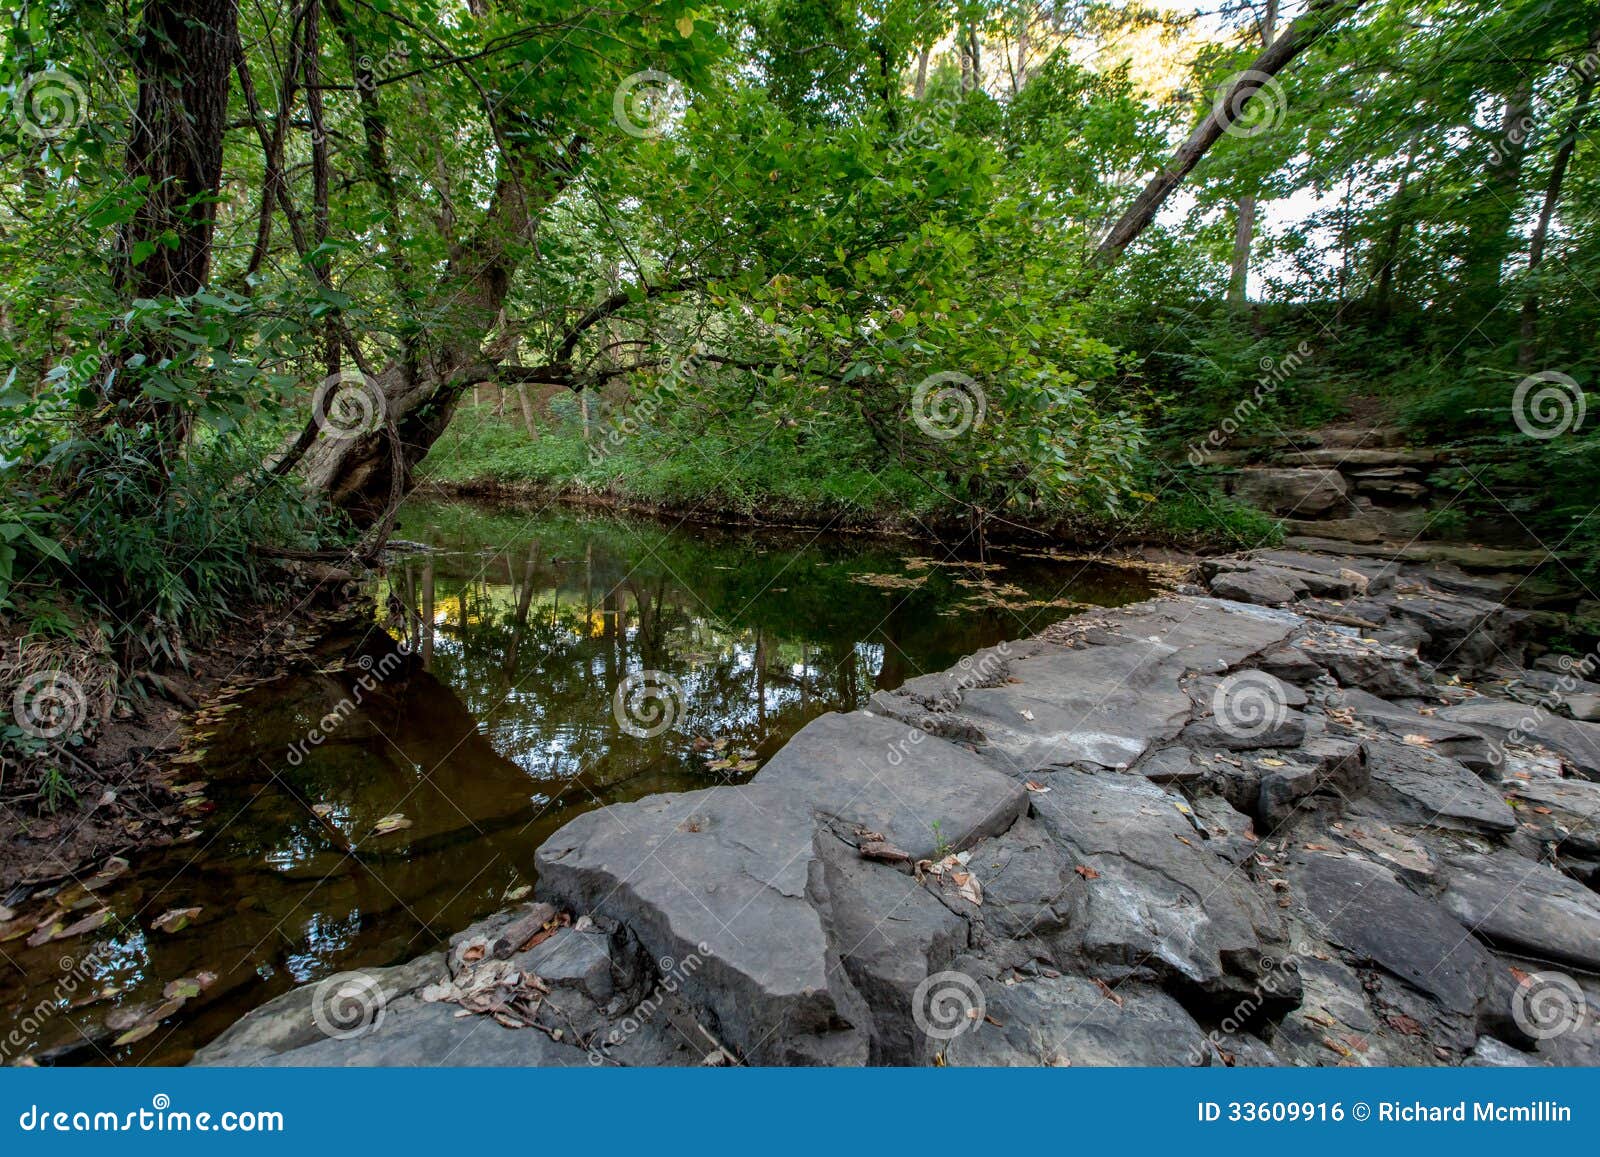 a tranquil spring or summer wooded nature outdoor scene.